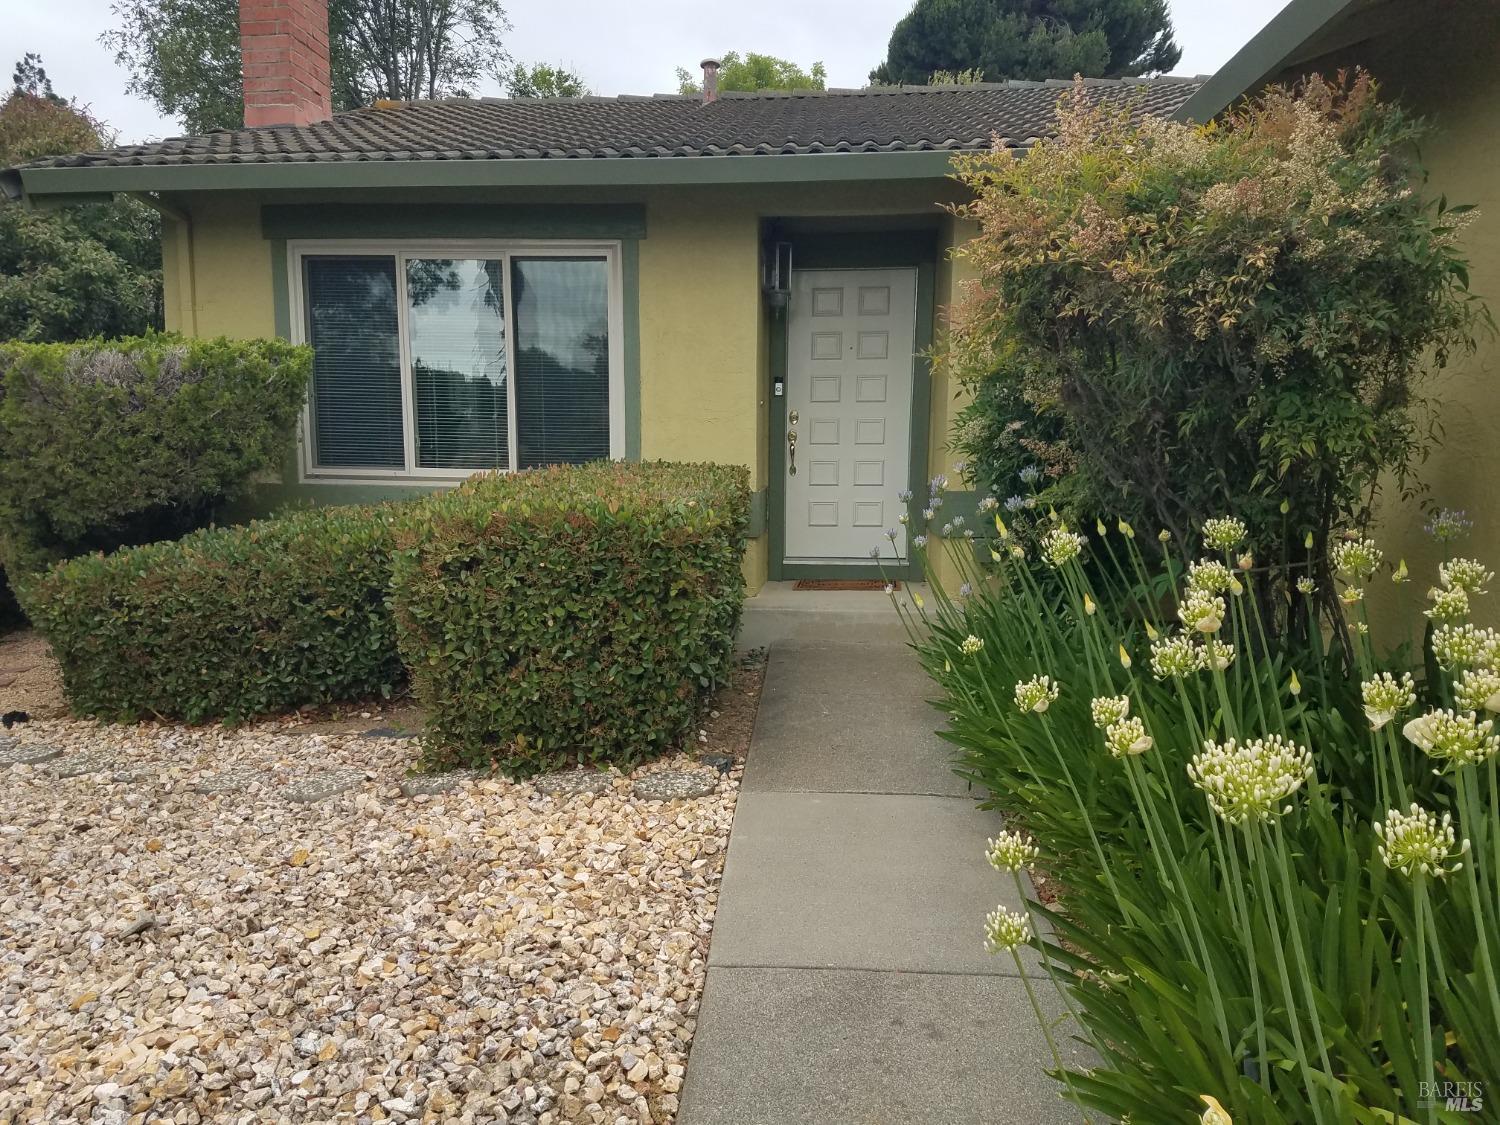 This 4 bedroom, 2 bath home is located in a very desirable area in Benicia. This home has dual pane 